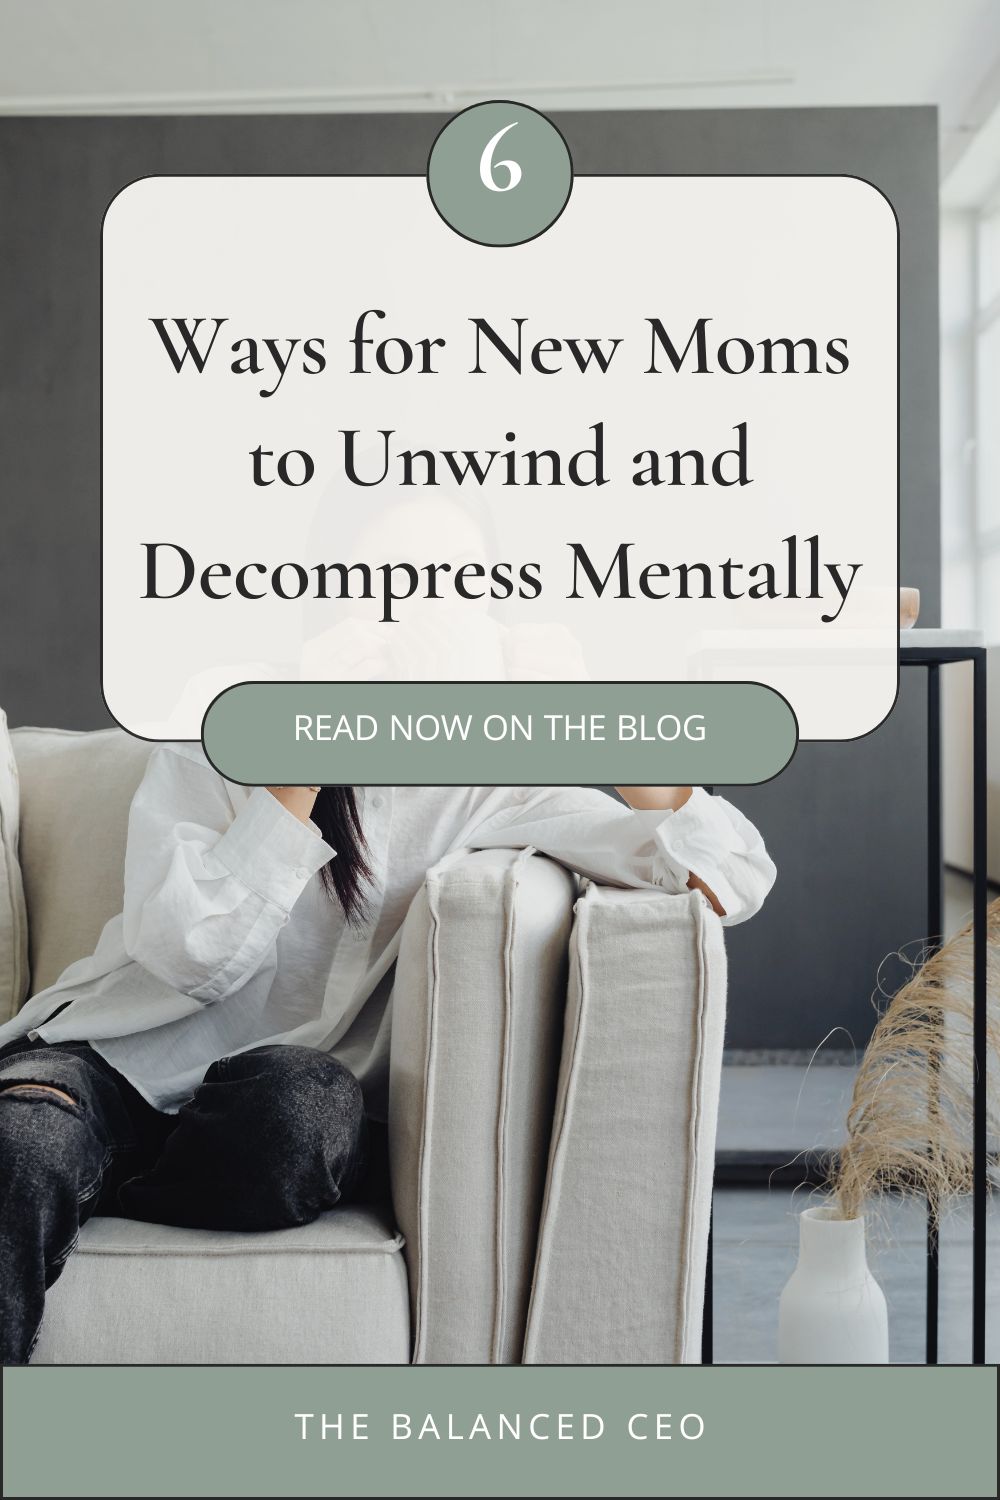 6 Ways for New Moms to Unwind and Decompress Mentally